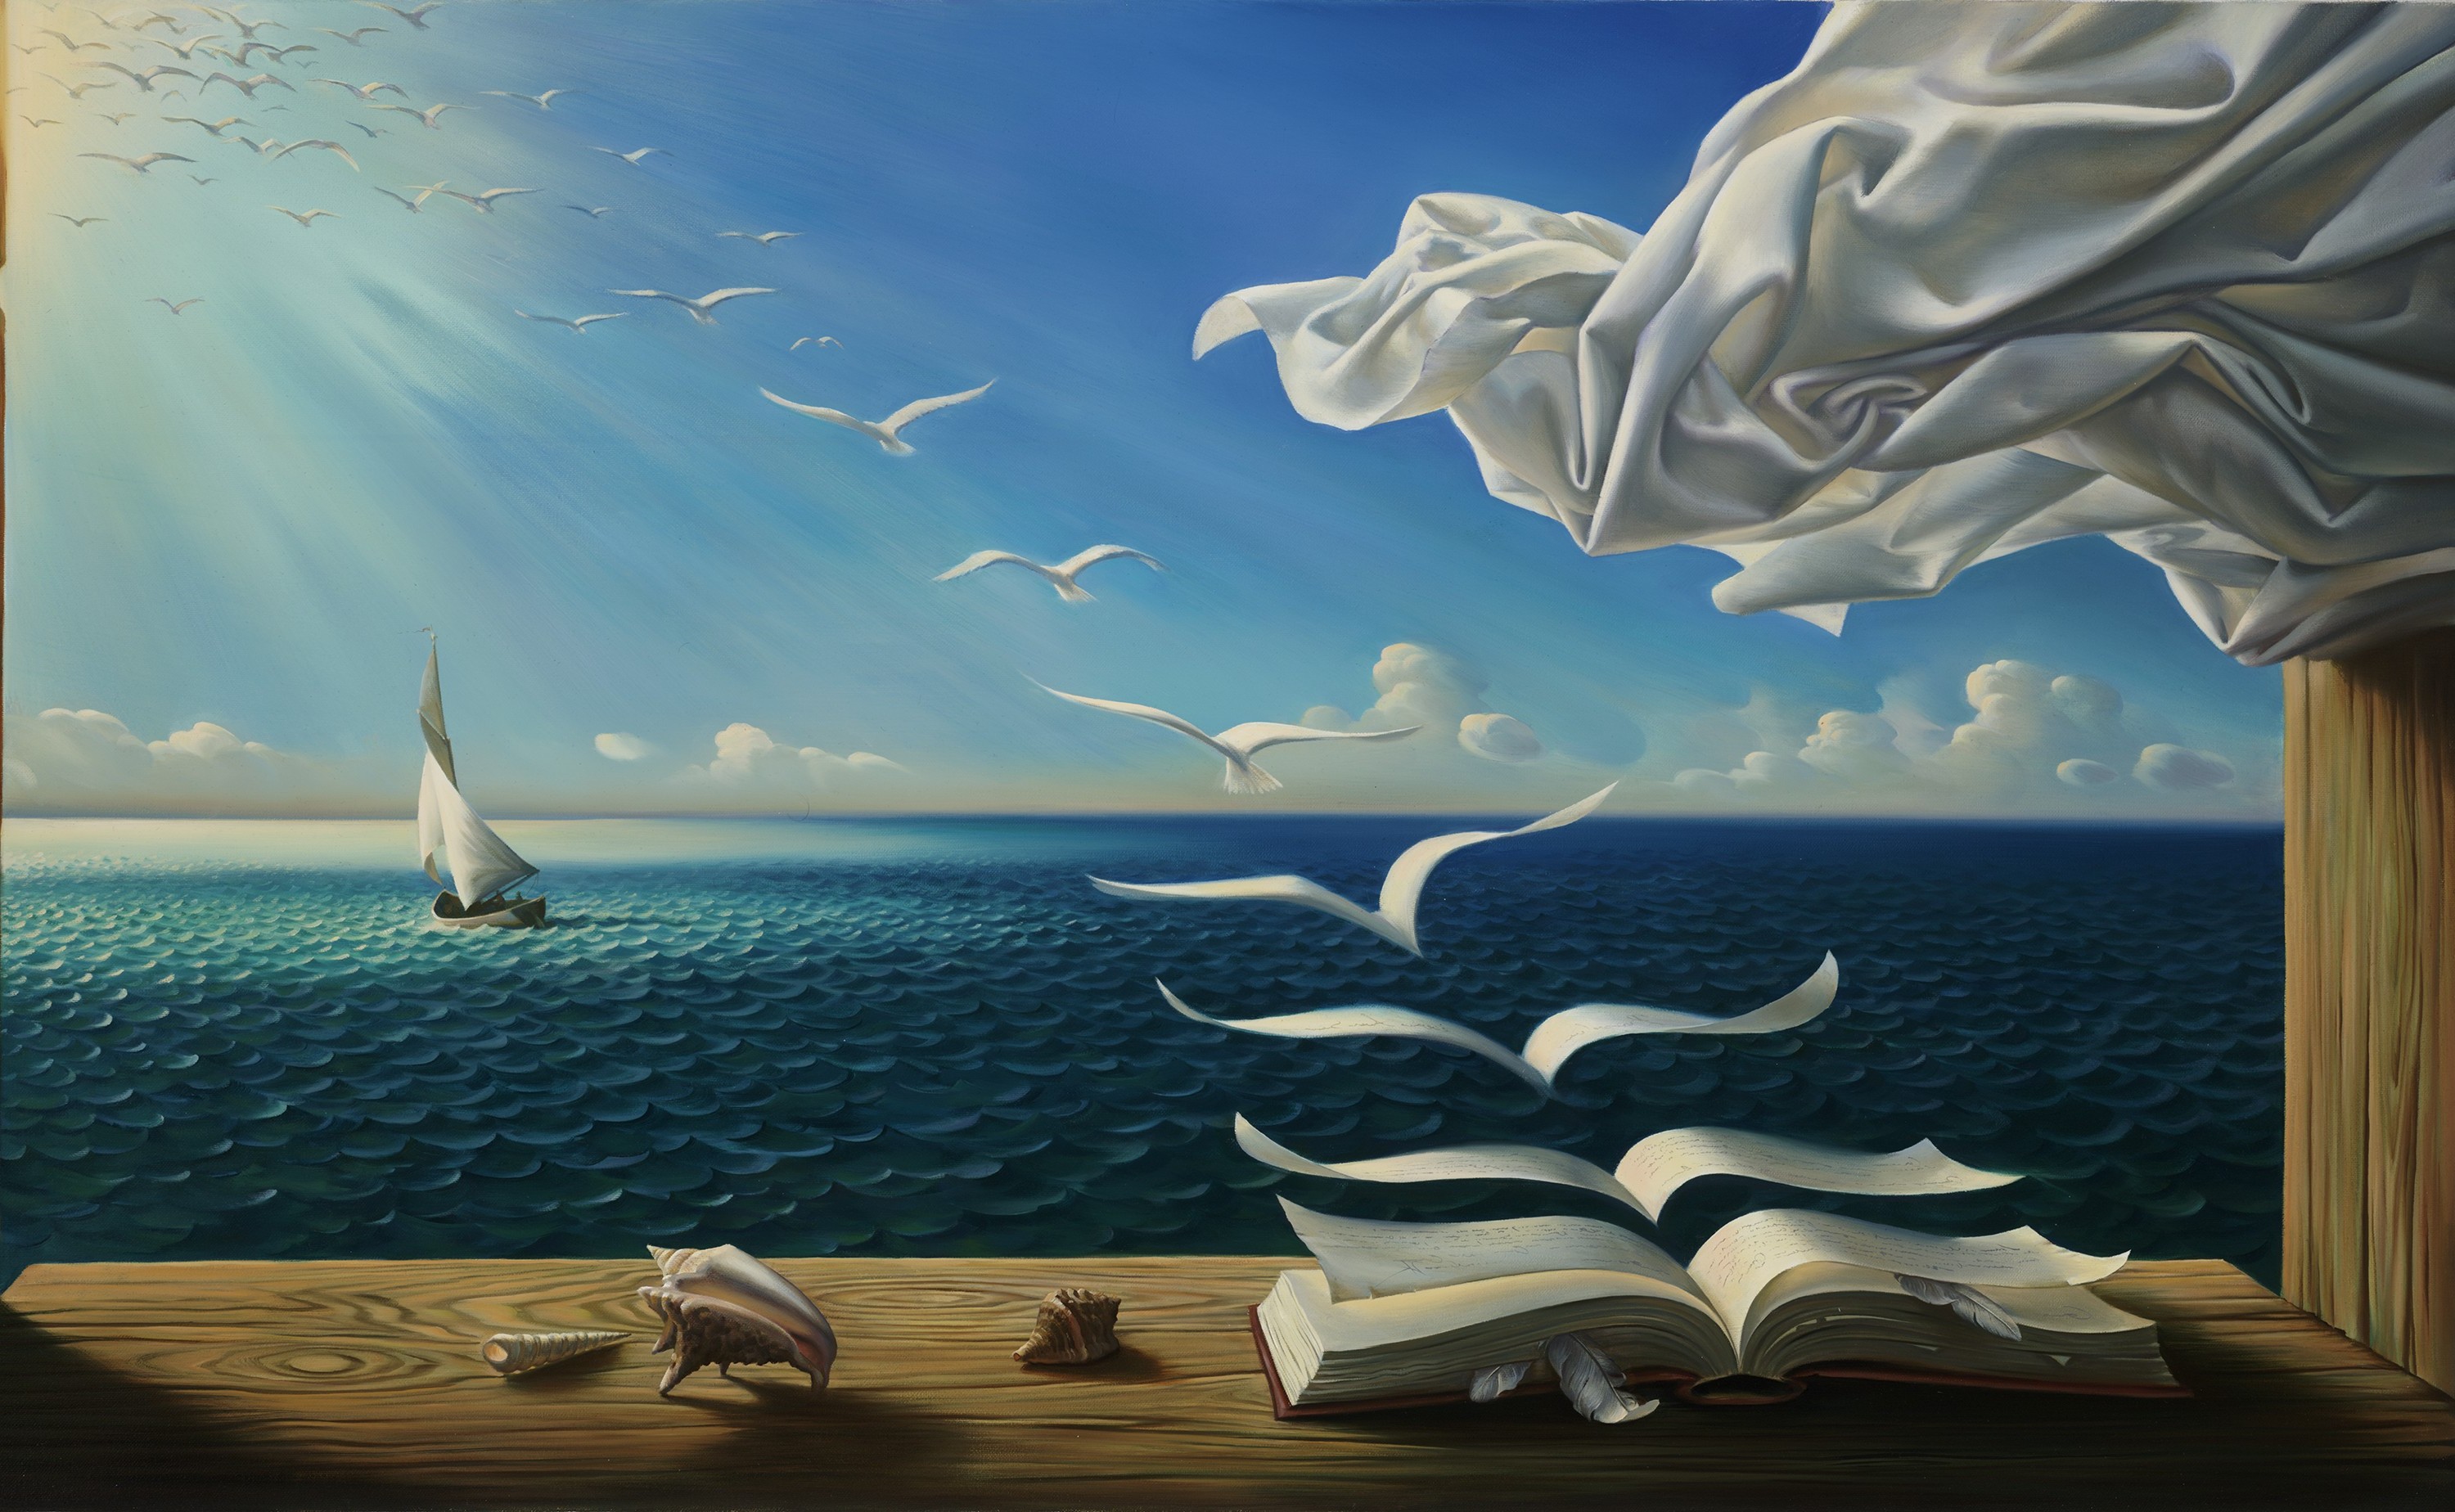 digital Art, Fantasy Art, Nature, Painting, Sea, Seashell, Table, Wood, Curtains, Feathers, Clouds, Sun, Sunlight, Books, Birds, Flying, Surreal Wallpaper